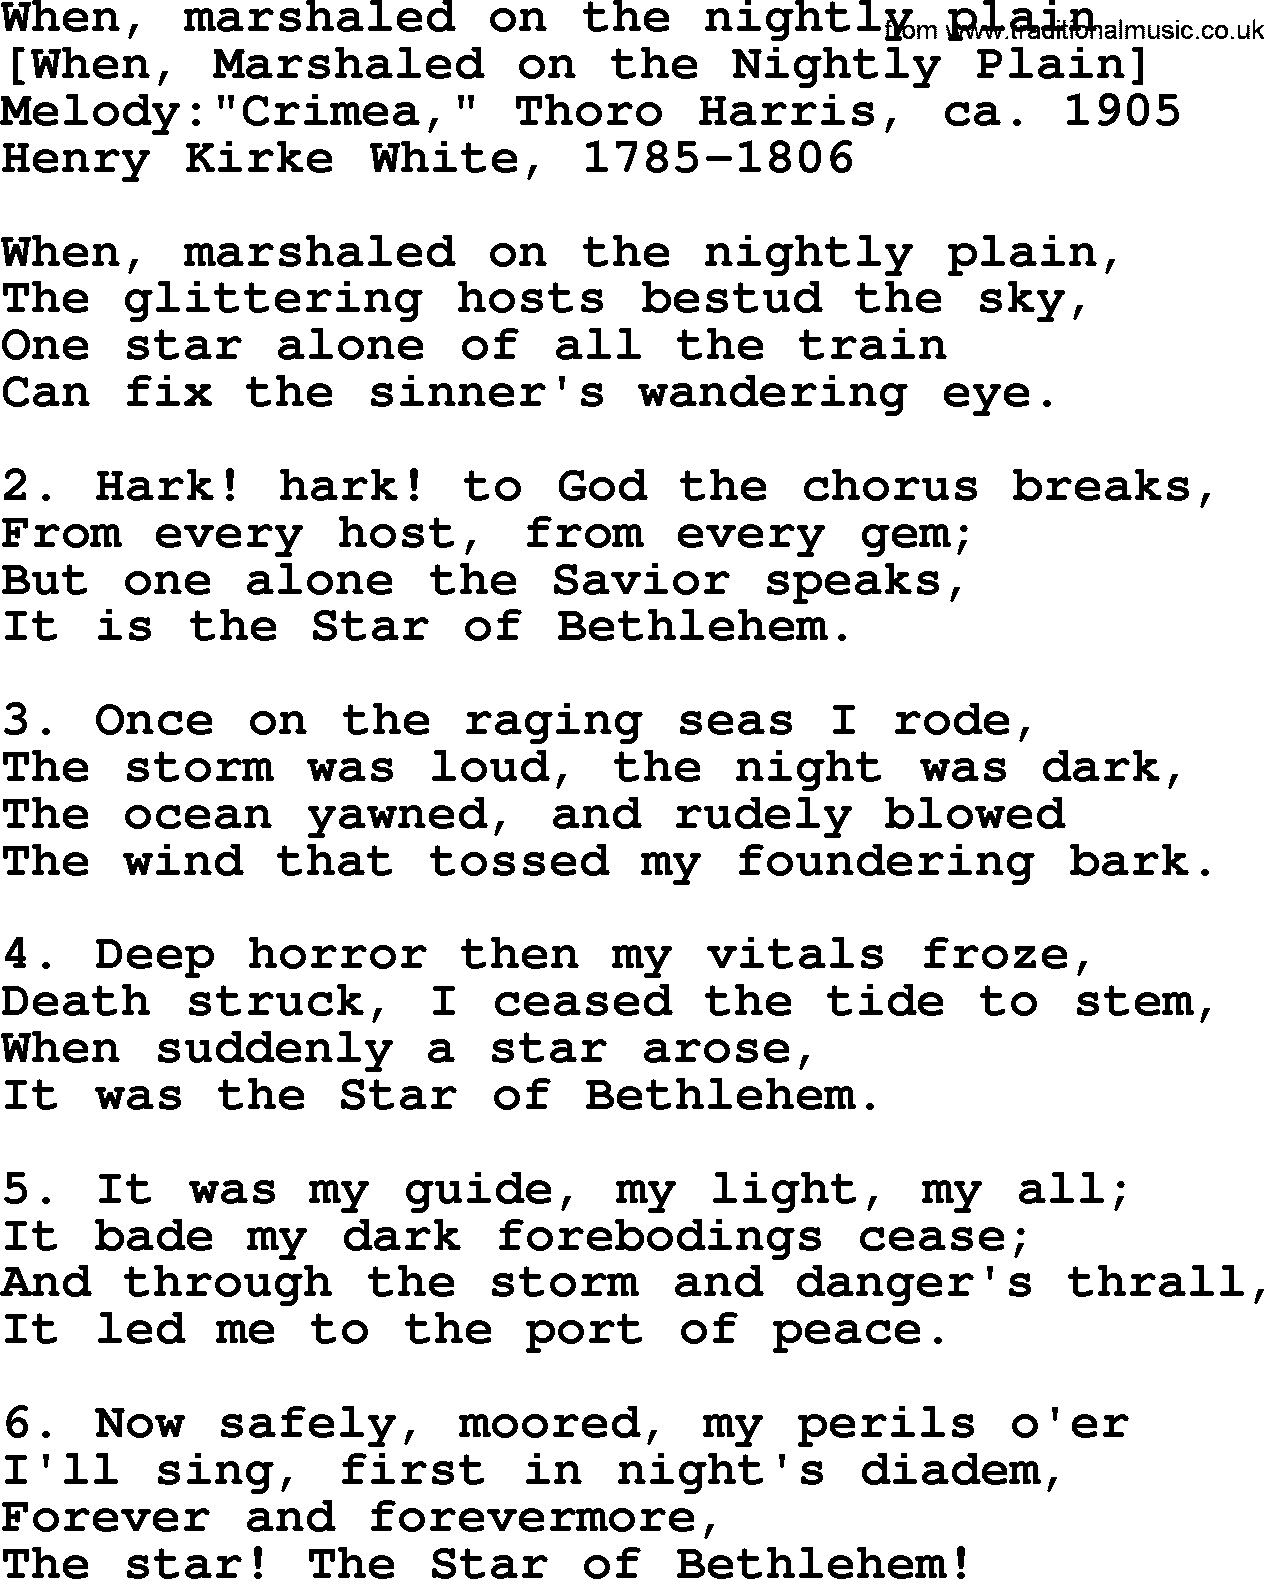 Old American Song: When, Marshaled On The Nightly Plain, lyrics